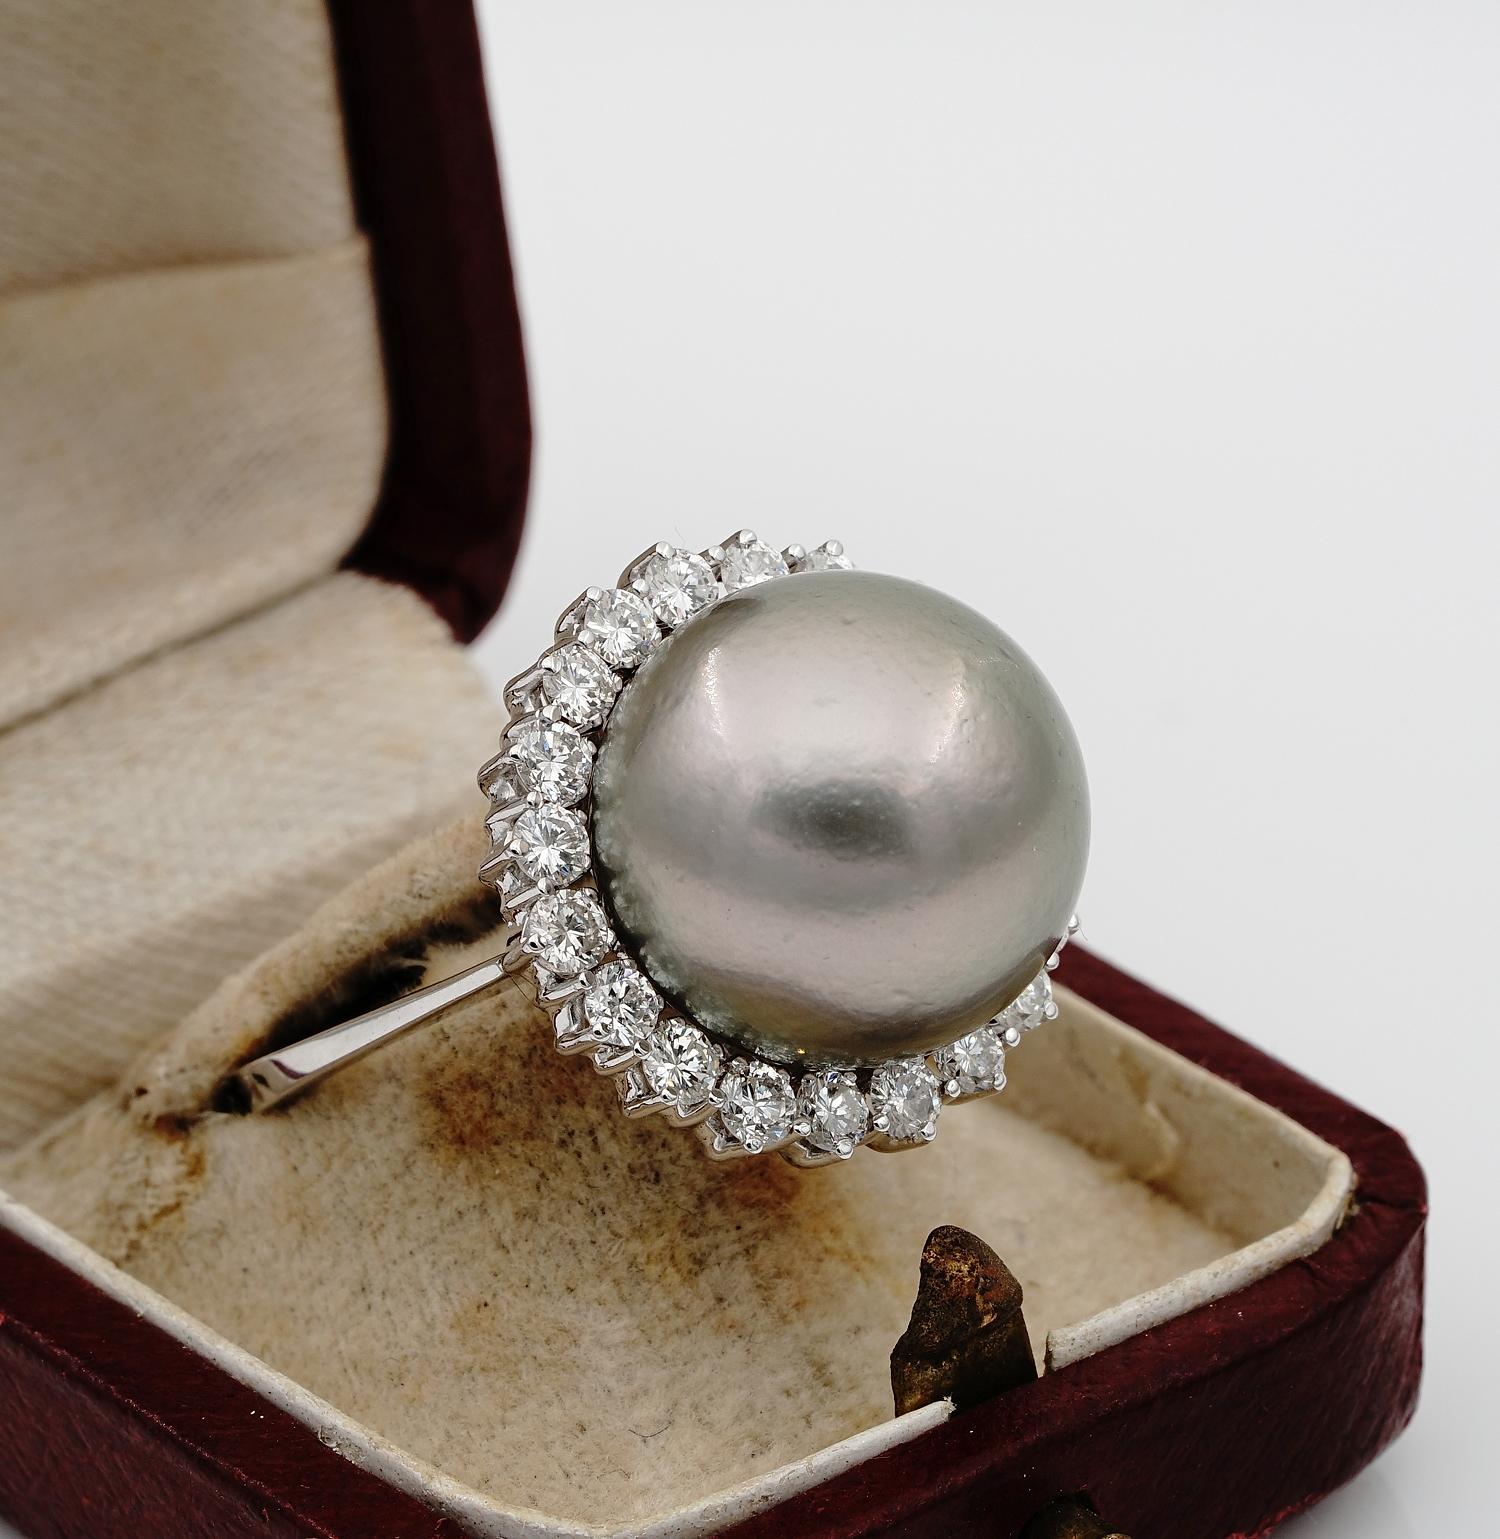 Rare Jumbo Sized Black South Sea Pearl Diamond Spectacular Vintage Ring In Excellent Condition For Sale In Napoli, IT